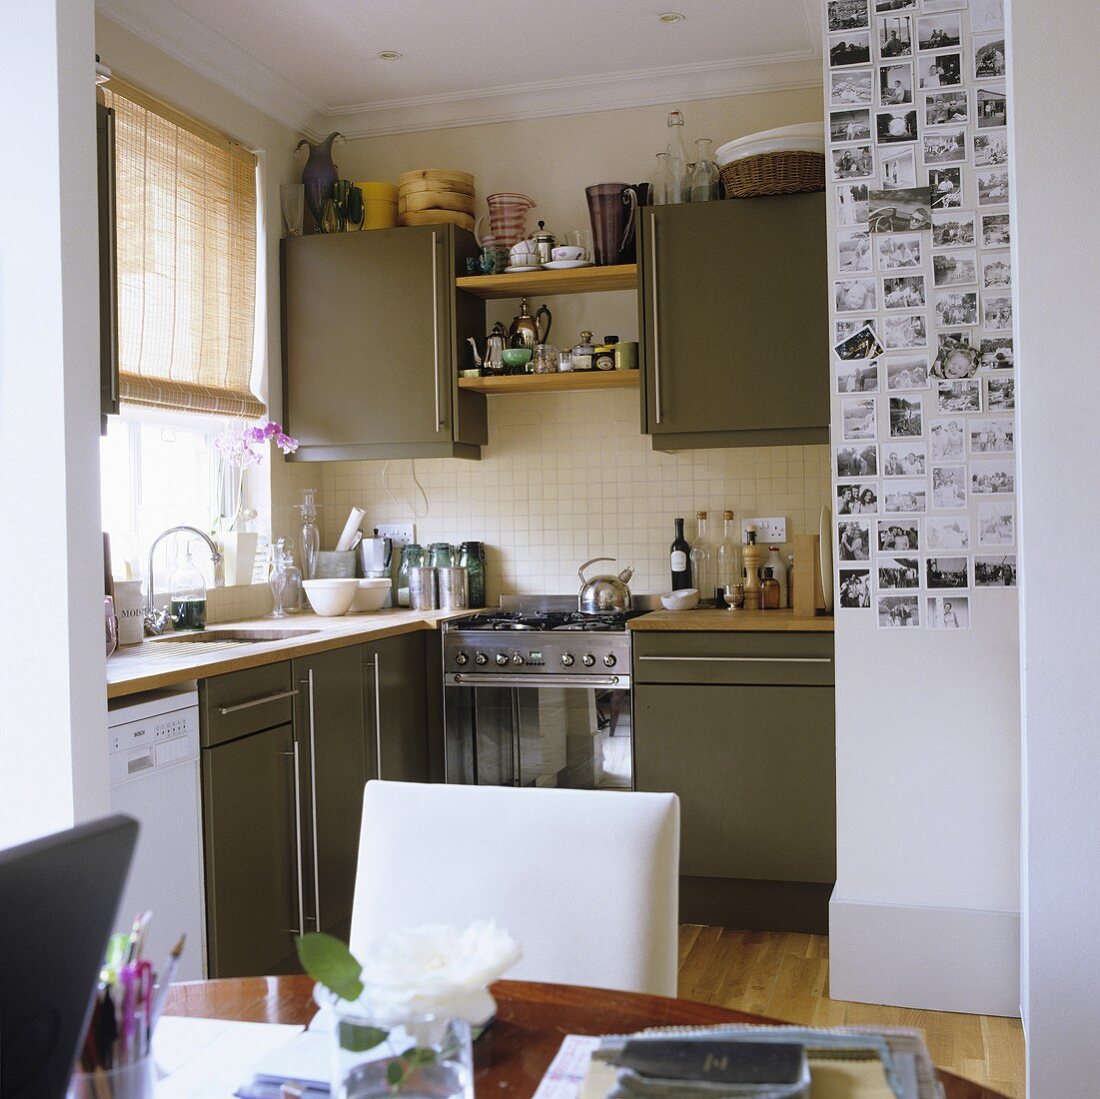 A dining room with a kitchen in the background with grey cupboards